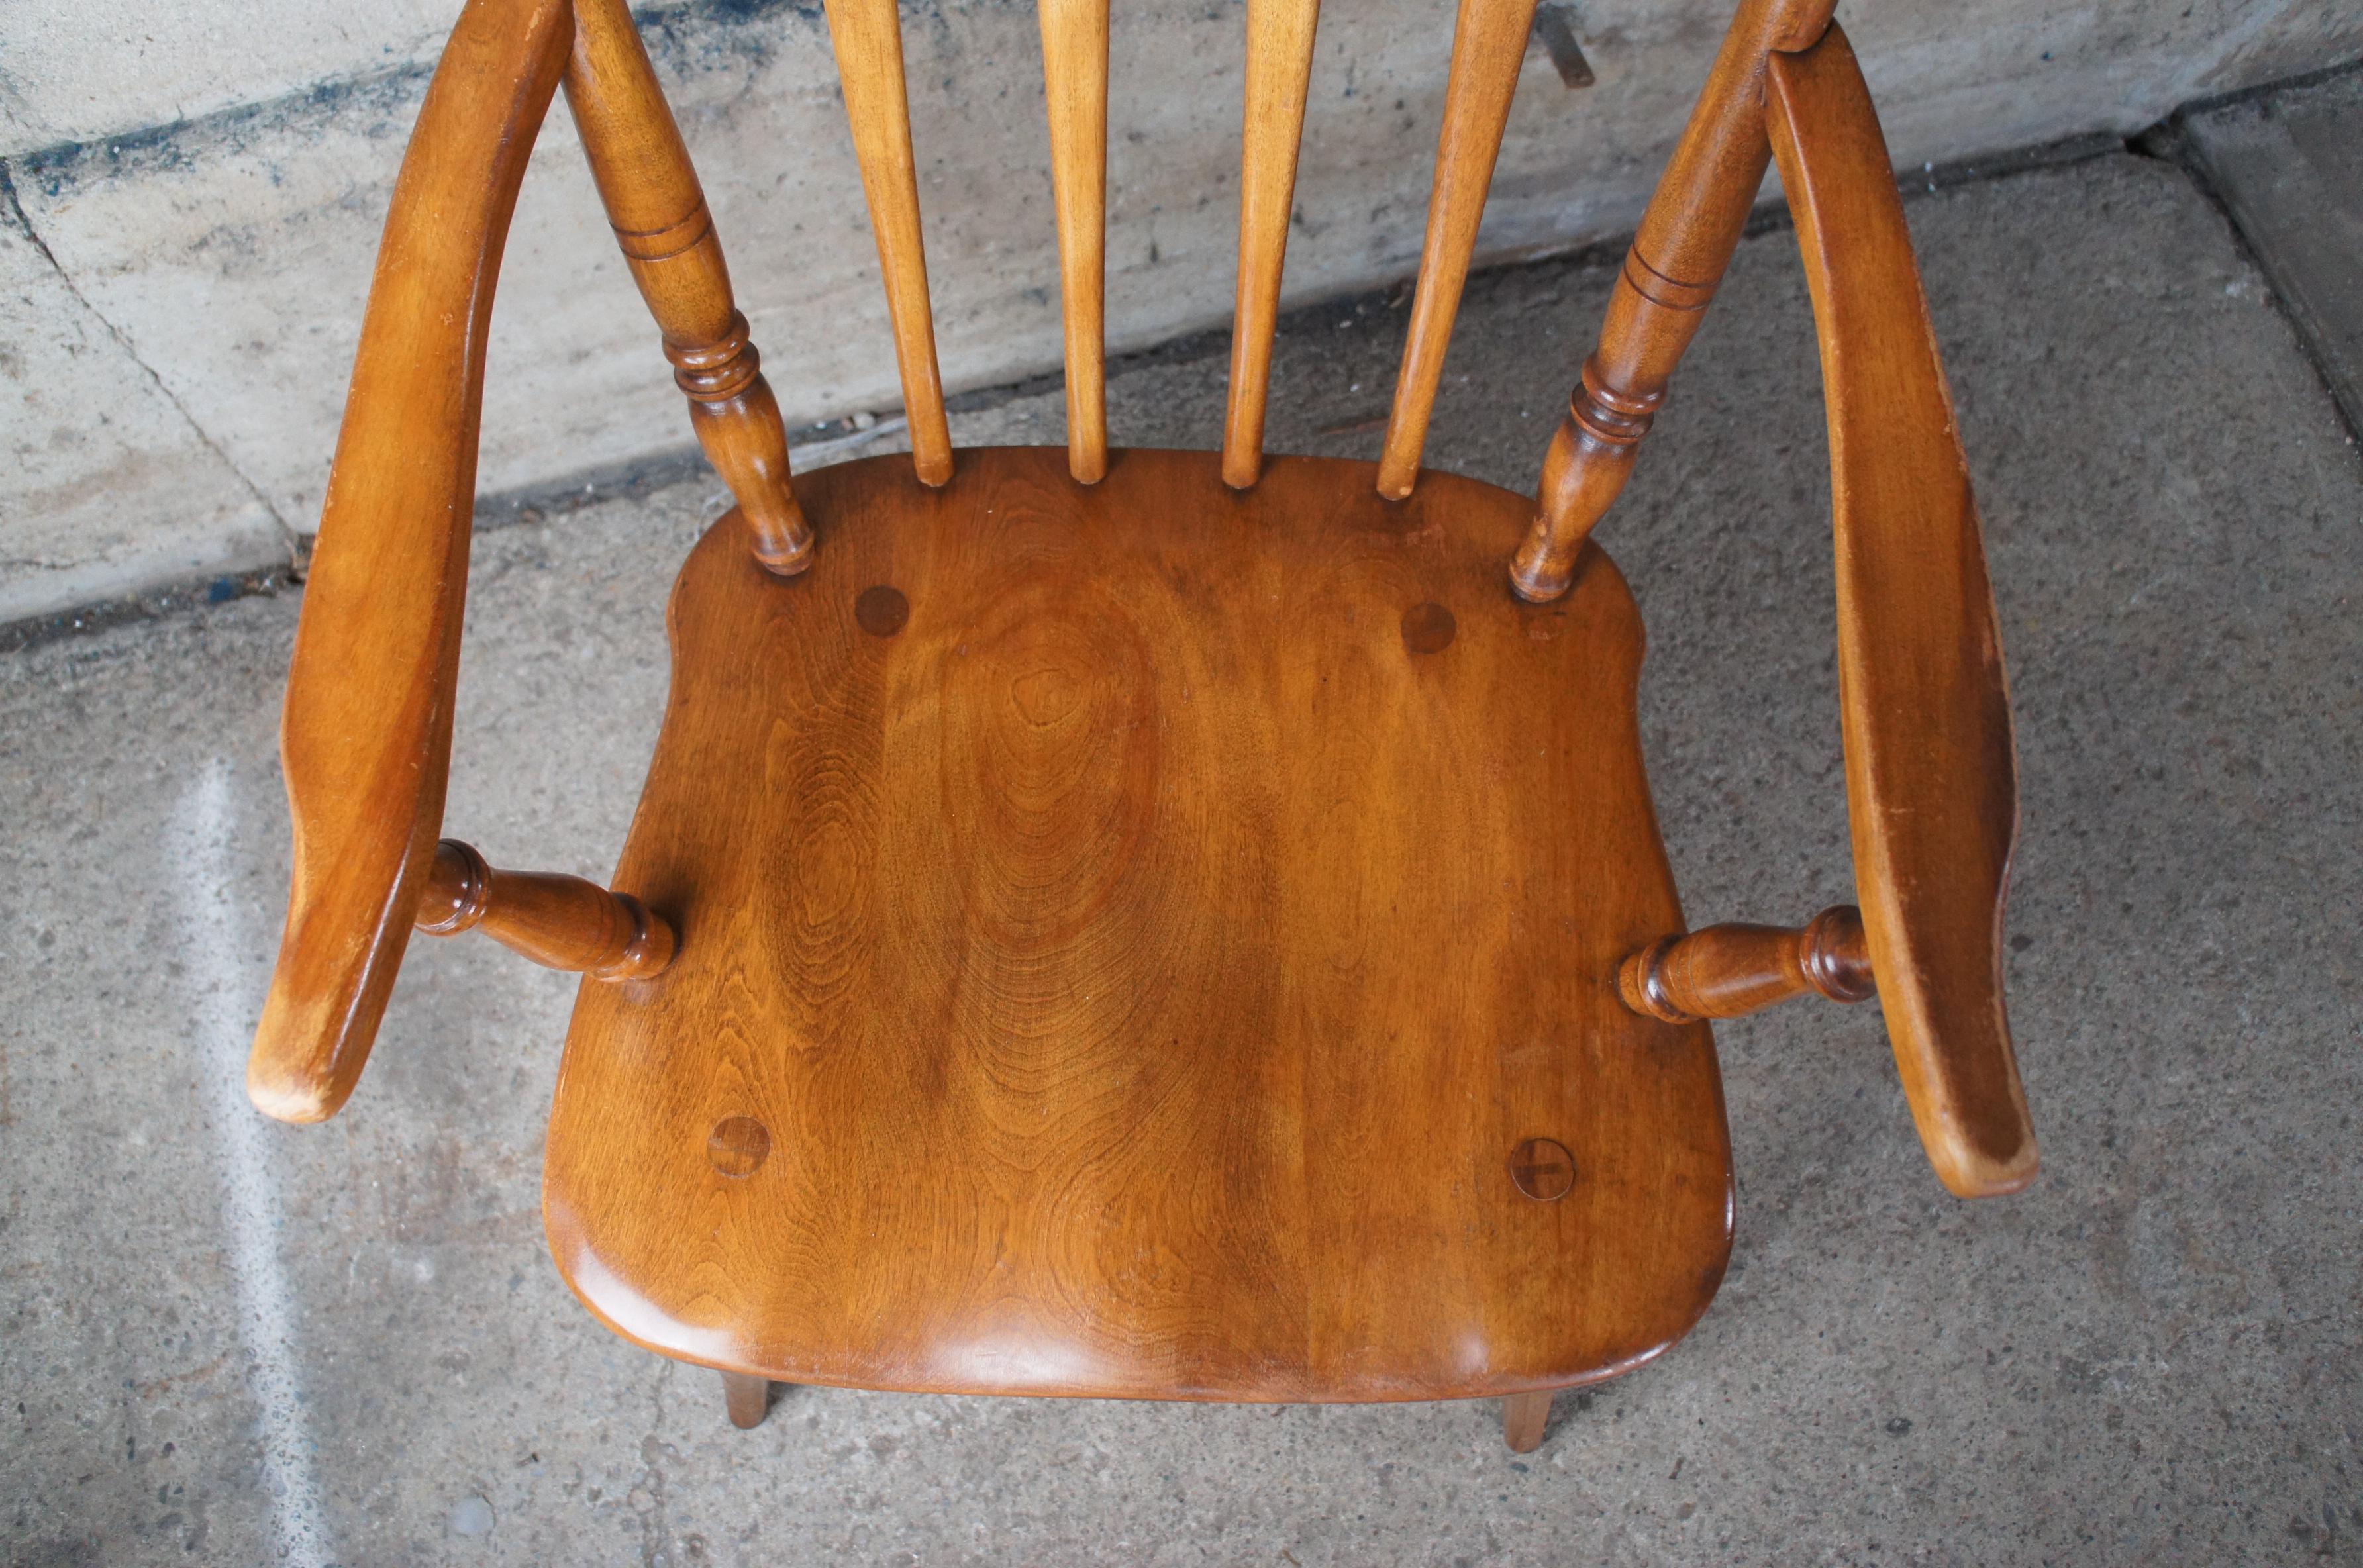 colonial dining chairs